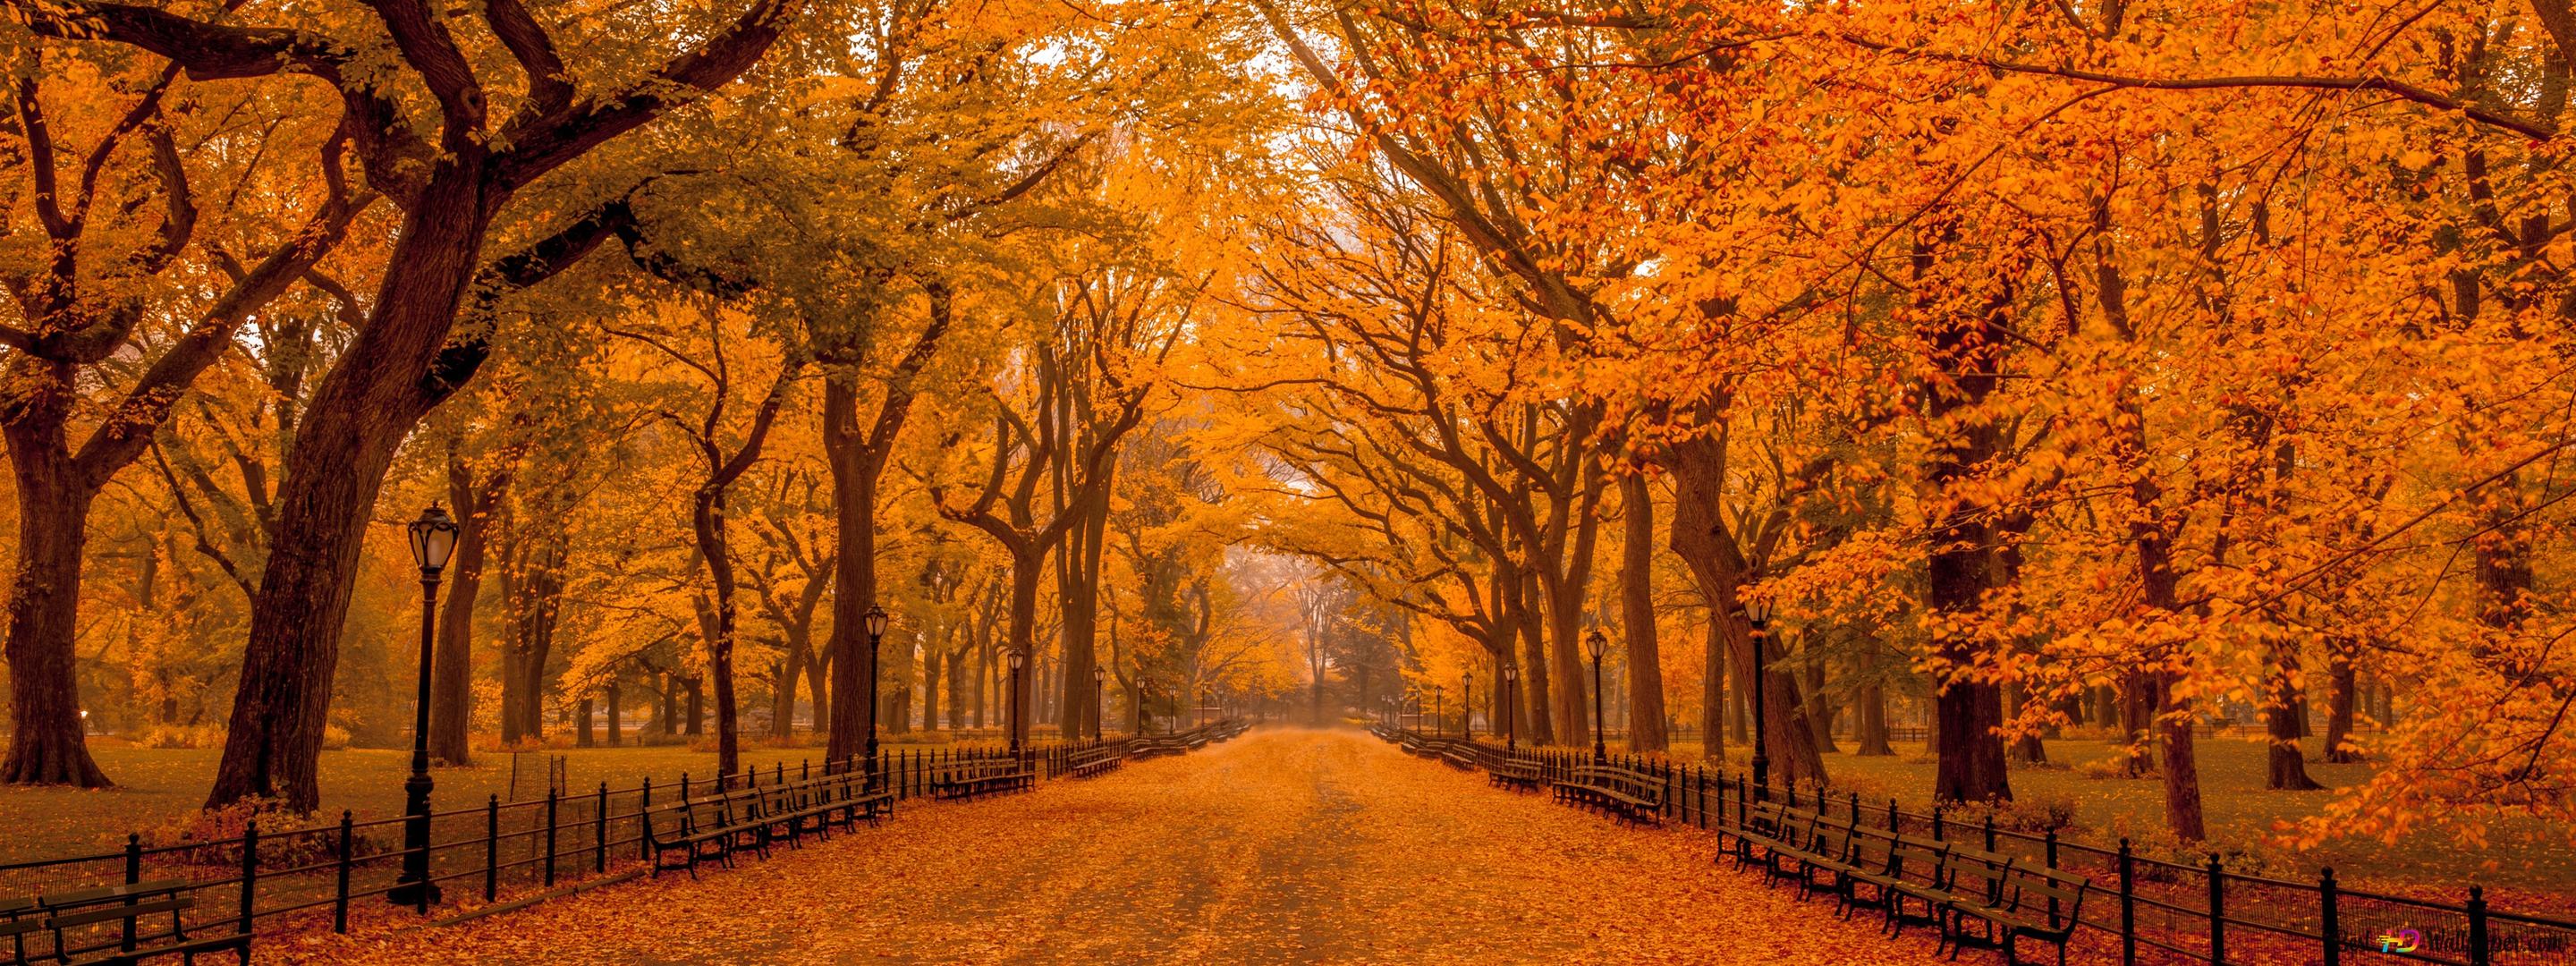 Central park forest road with its unique colors in autumn 4K wallpaper download